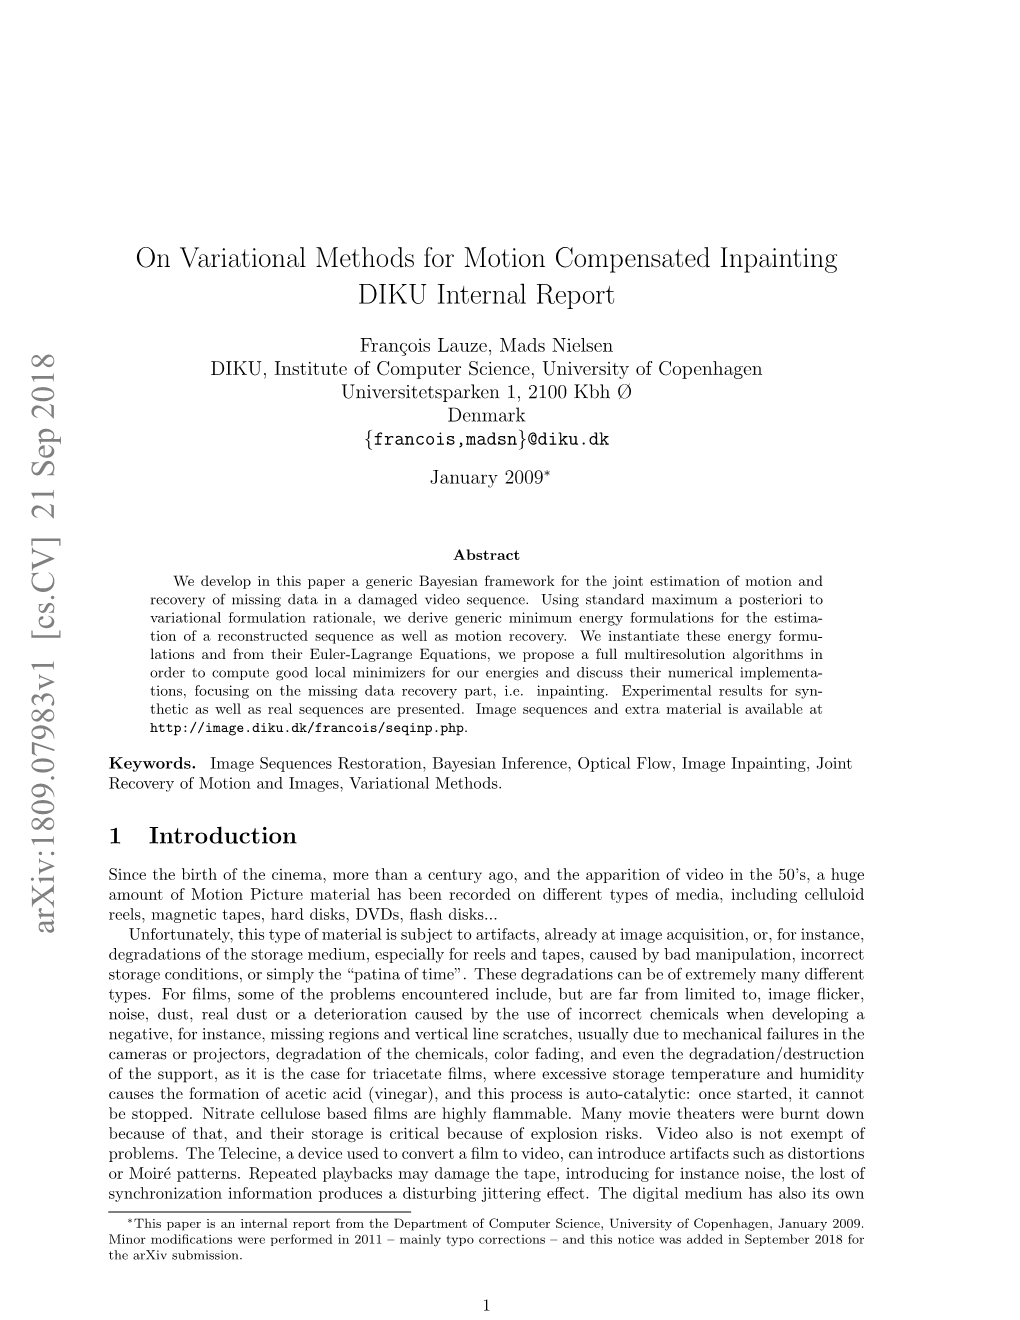 On Variational Methods for Motion Compensated Inpainting DIKU Internal Report